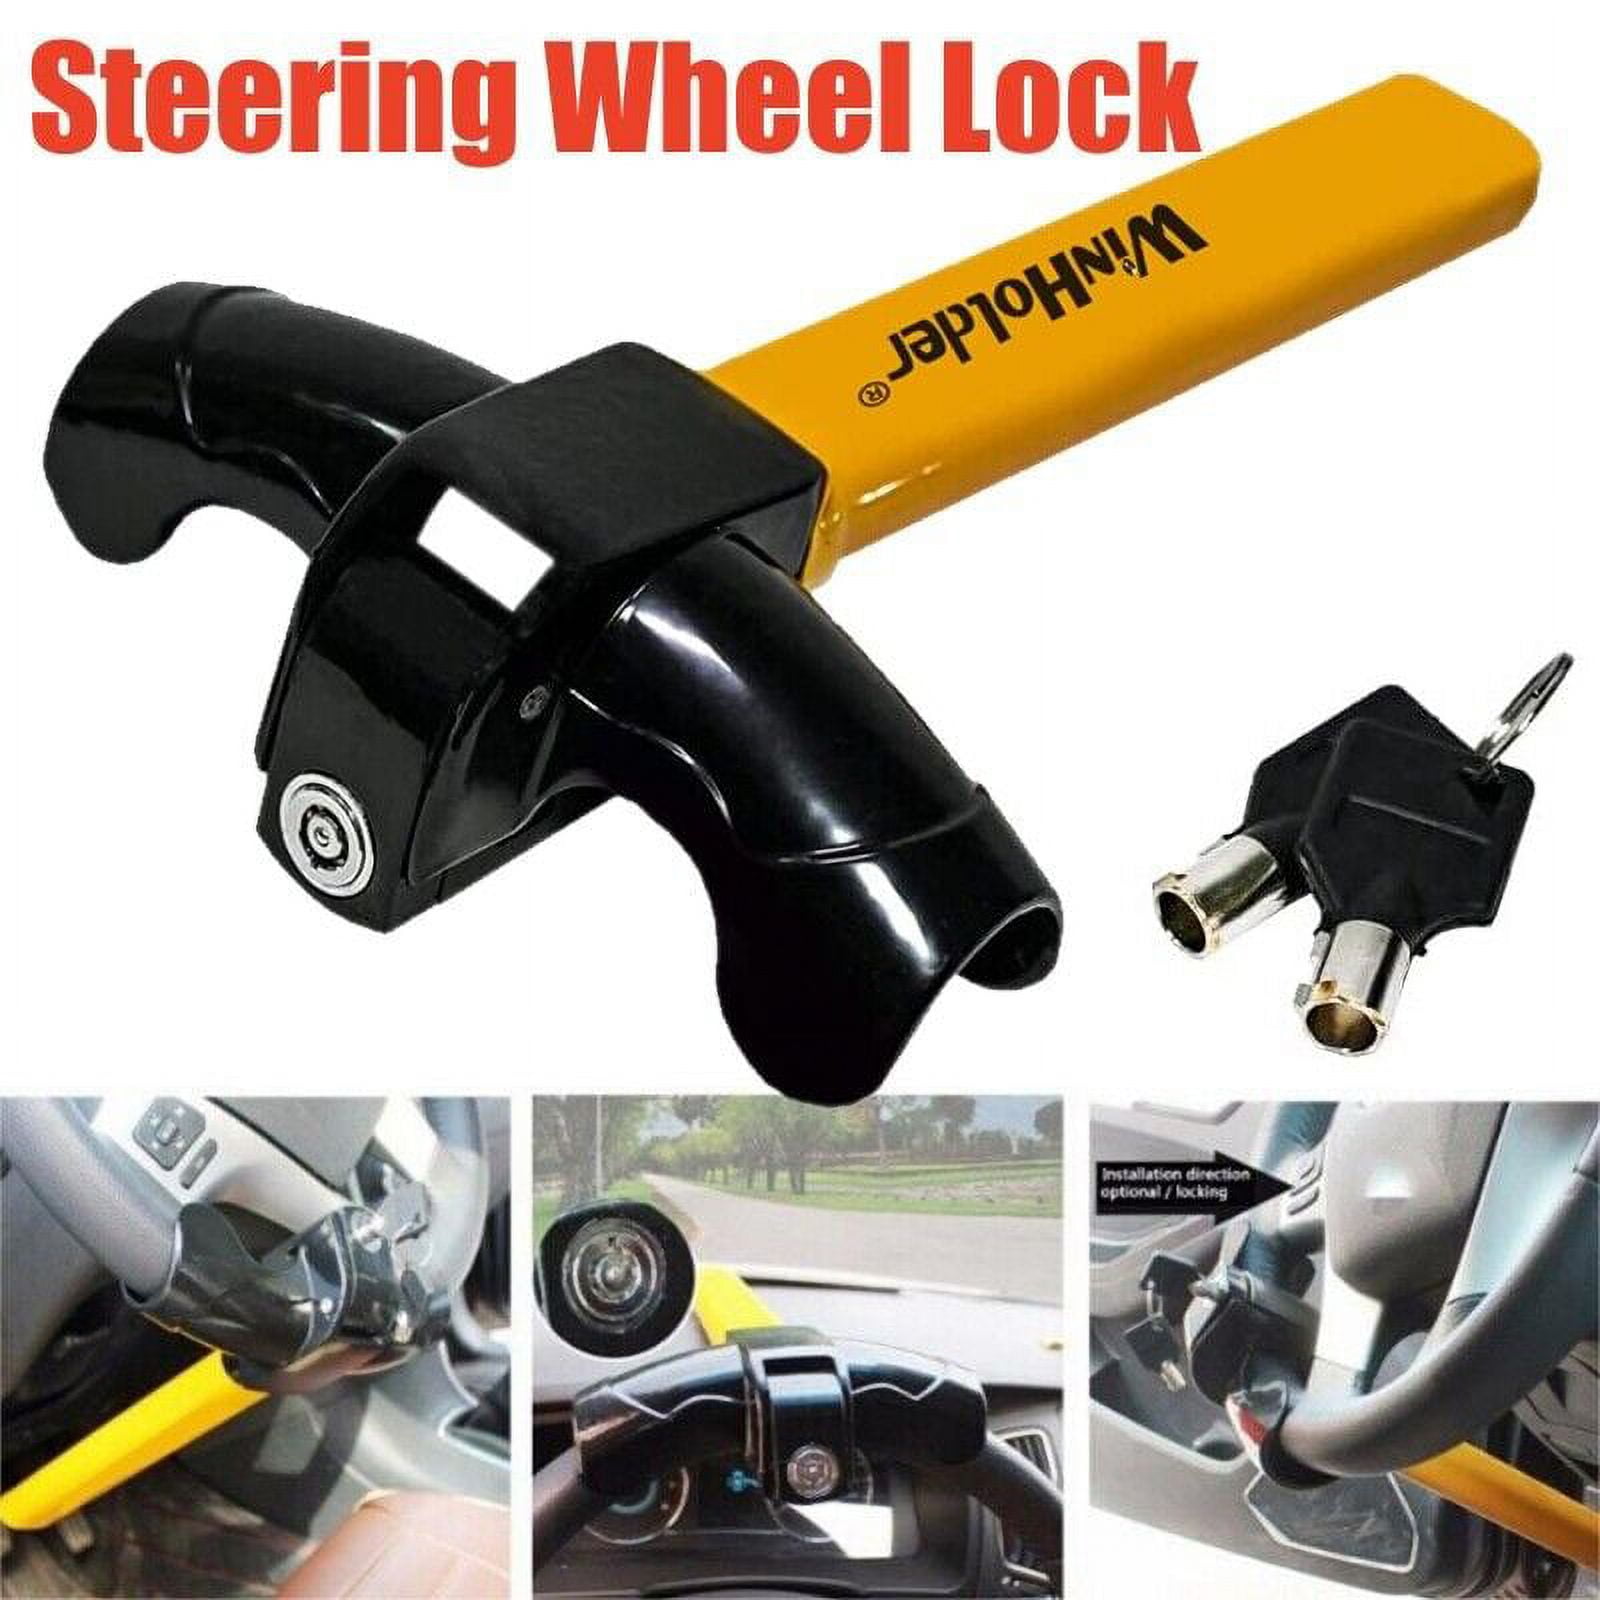 Car Steering Wheel Lock Vehicle Security Auto Safety Lock Anti-Theft Device Car  Security Accessories 